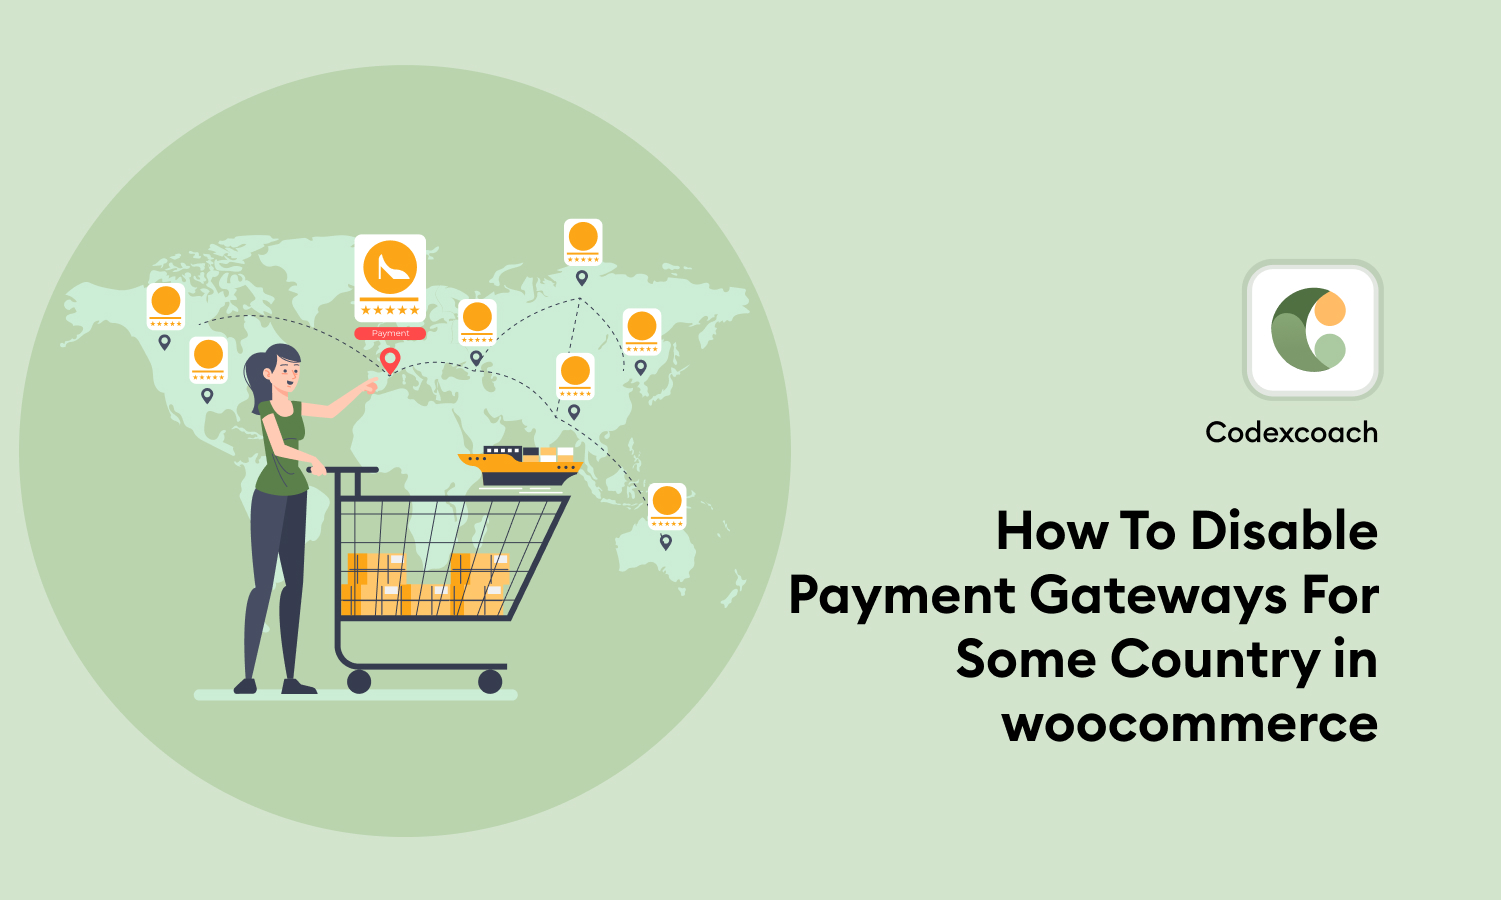 How To Disable Payment Gateways For Some Country in woocommerce